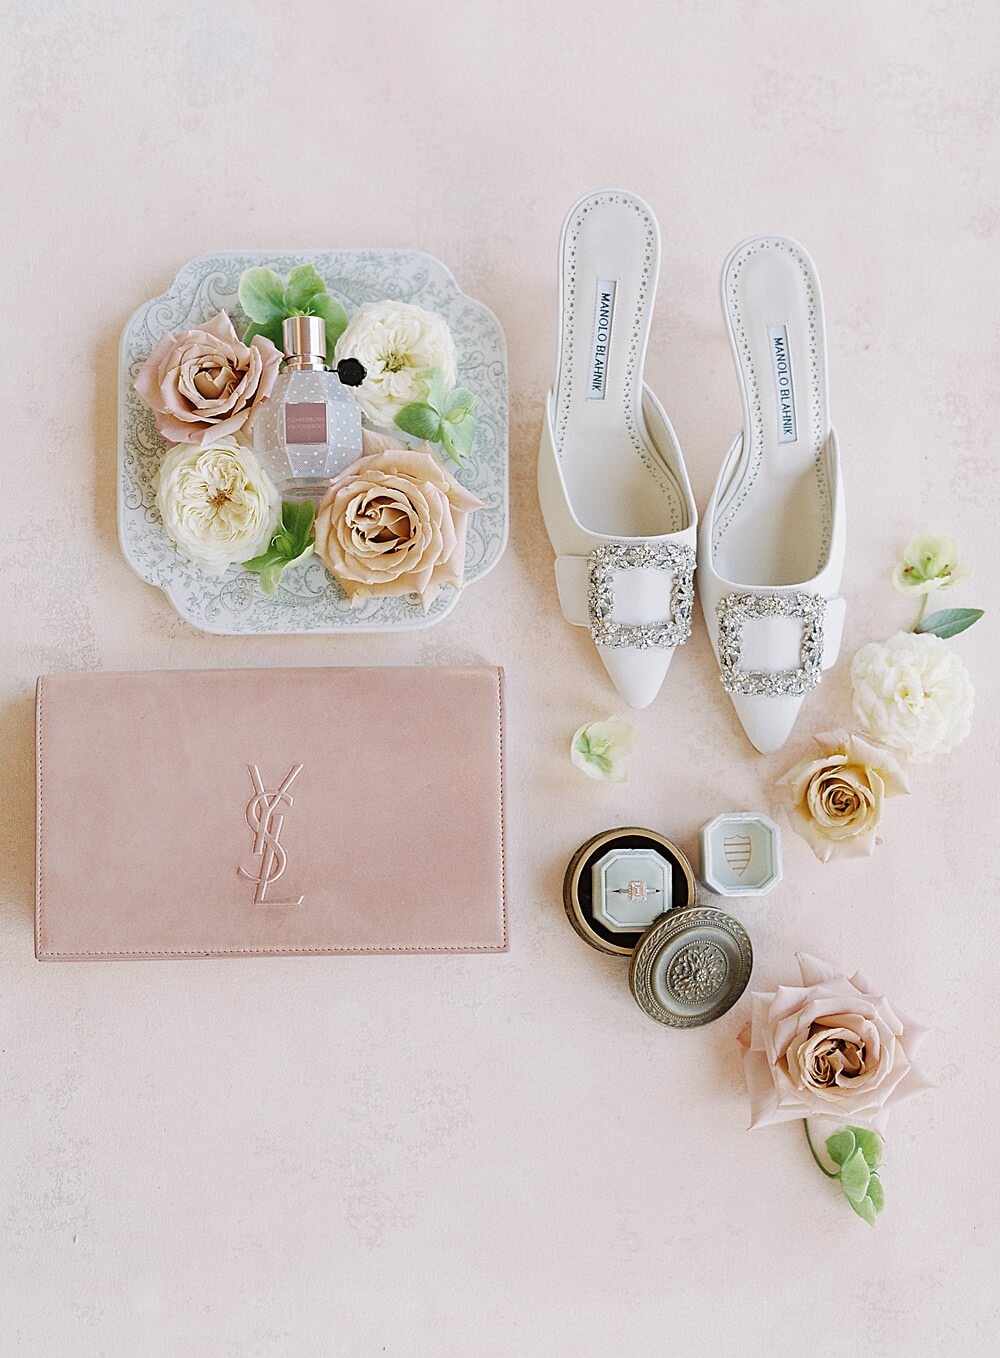 luxury bridal details and manolo blahnik bridal shoes with peach cream and green florals - Jacqueline Benét Photography